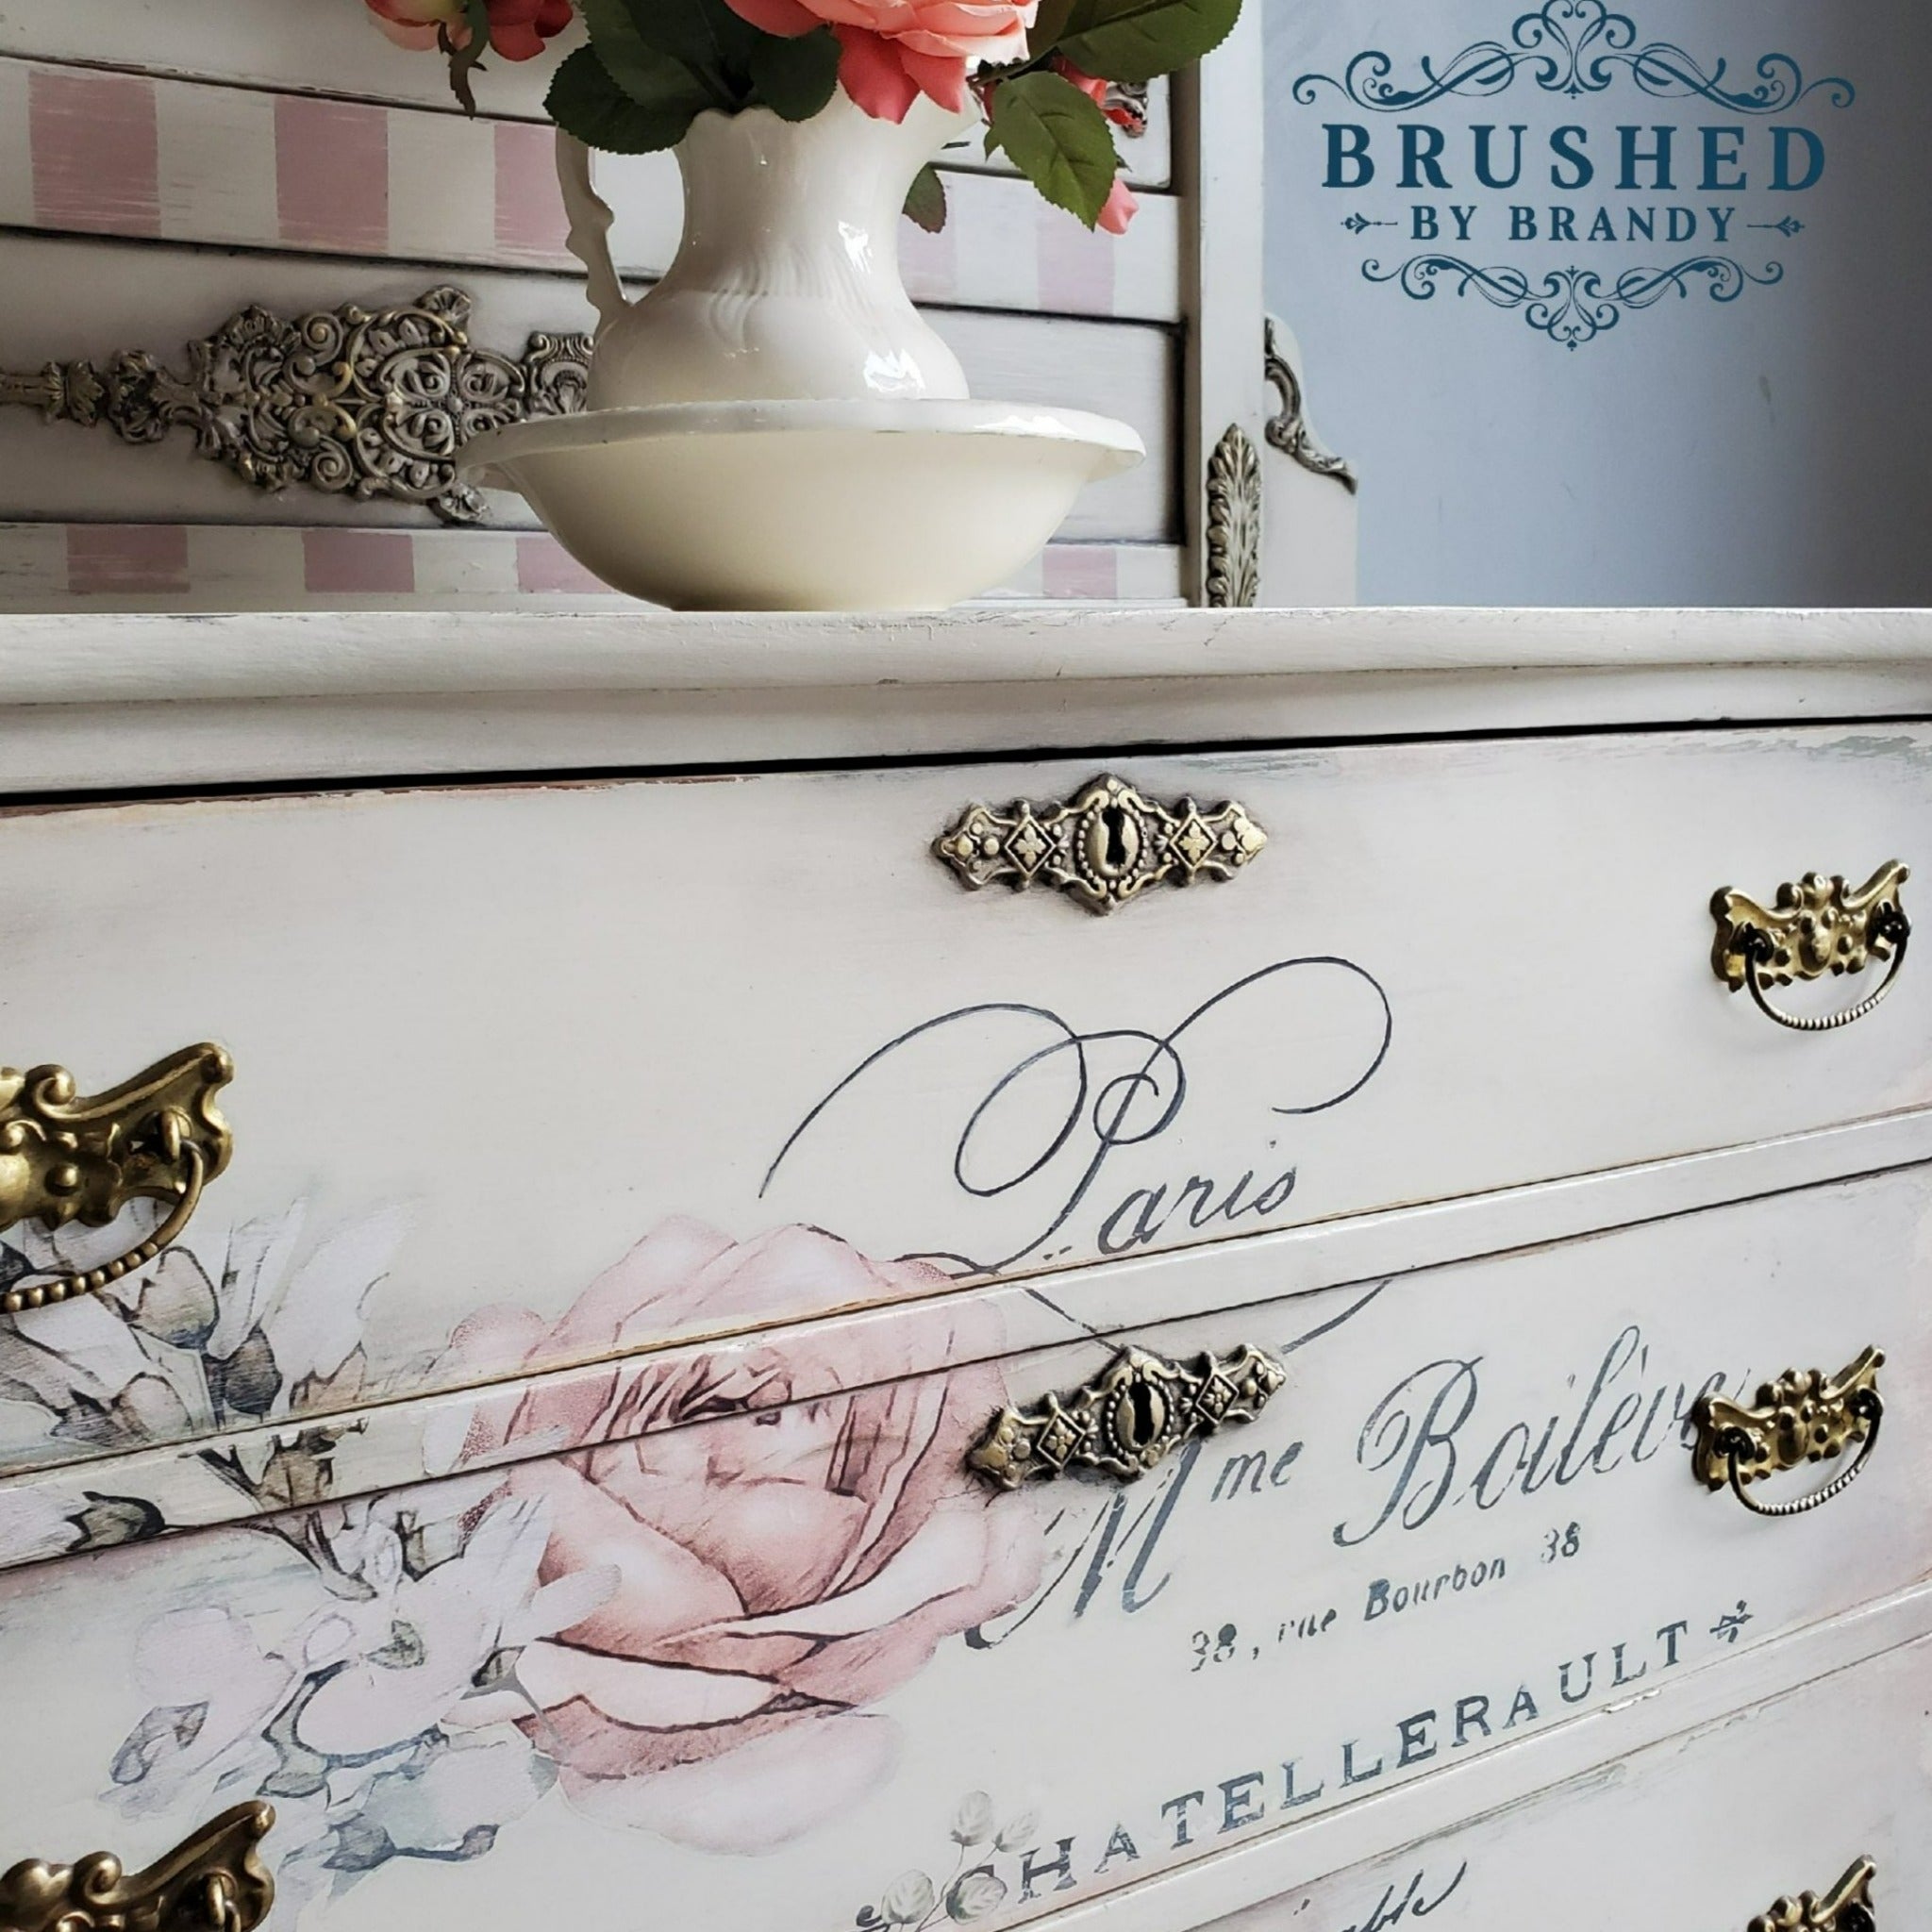 A close-up of a vintage small buffet table refurbished by Brushed by Brandy is painted a cream white and features the Chatellerault transfer on its drawers.